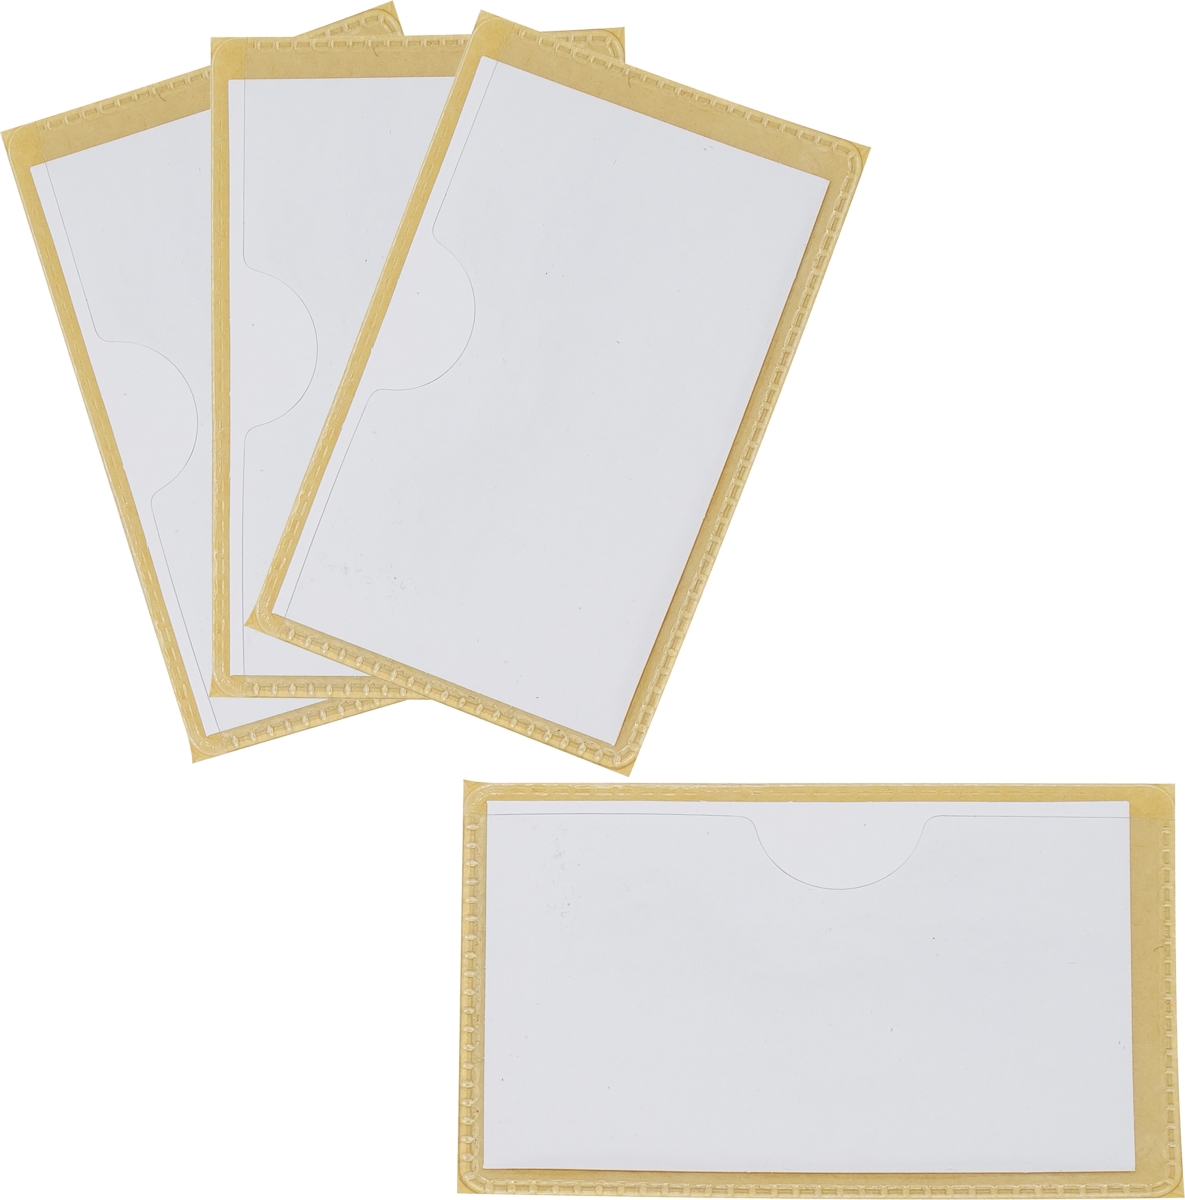 2 X 3 In. Label Pockets With Adhesive Backing, Clear - Pack Of 6